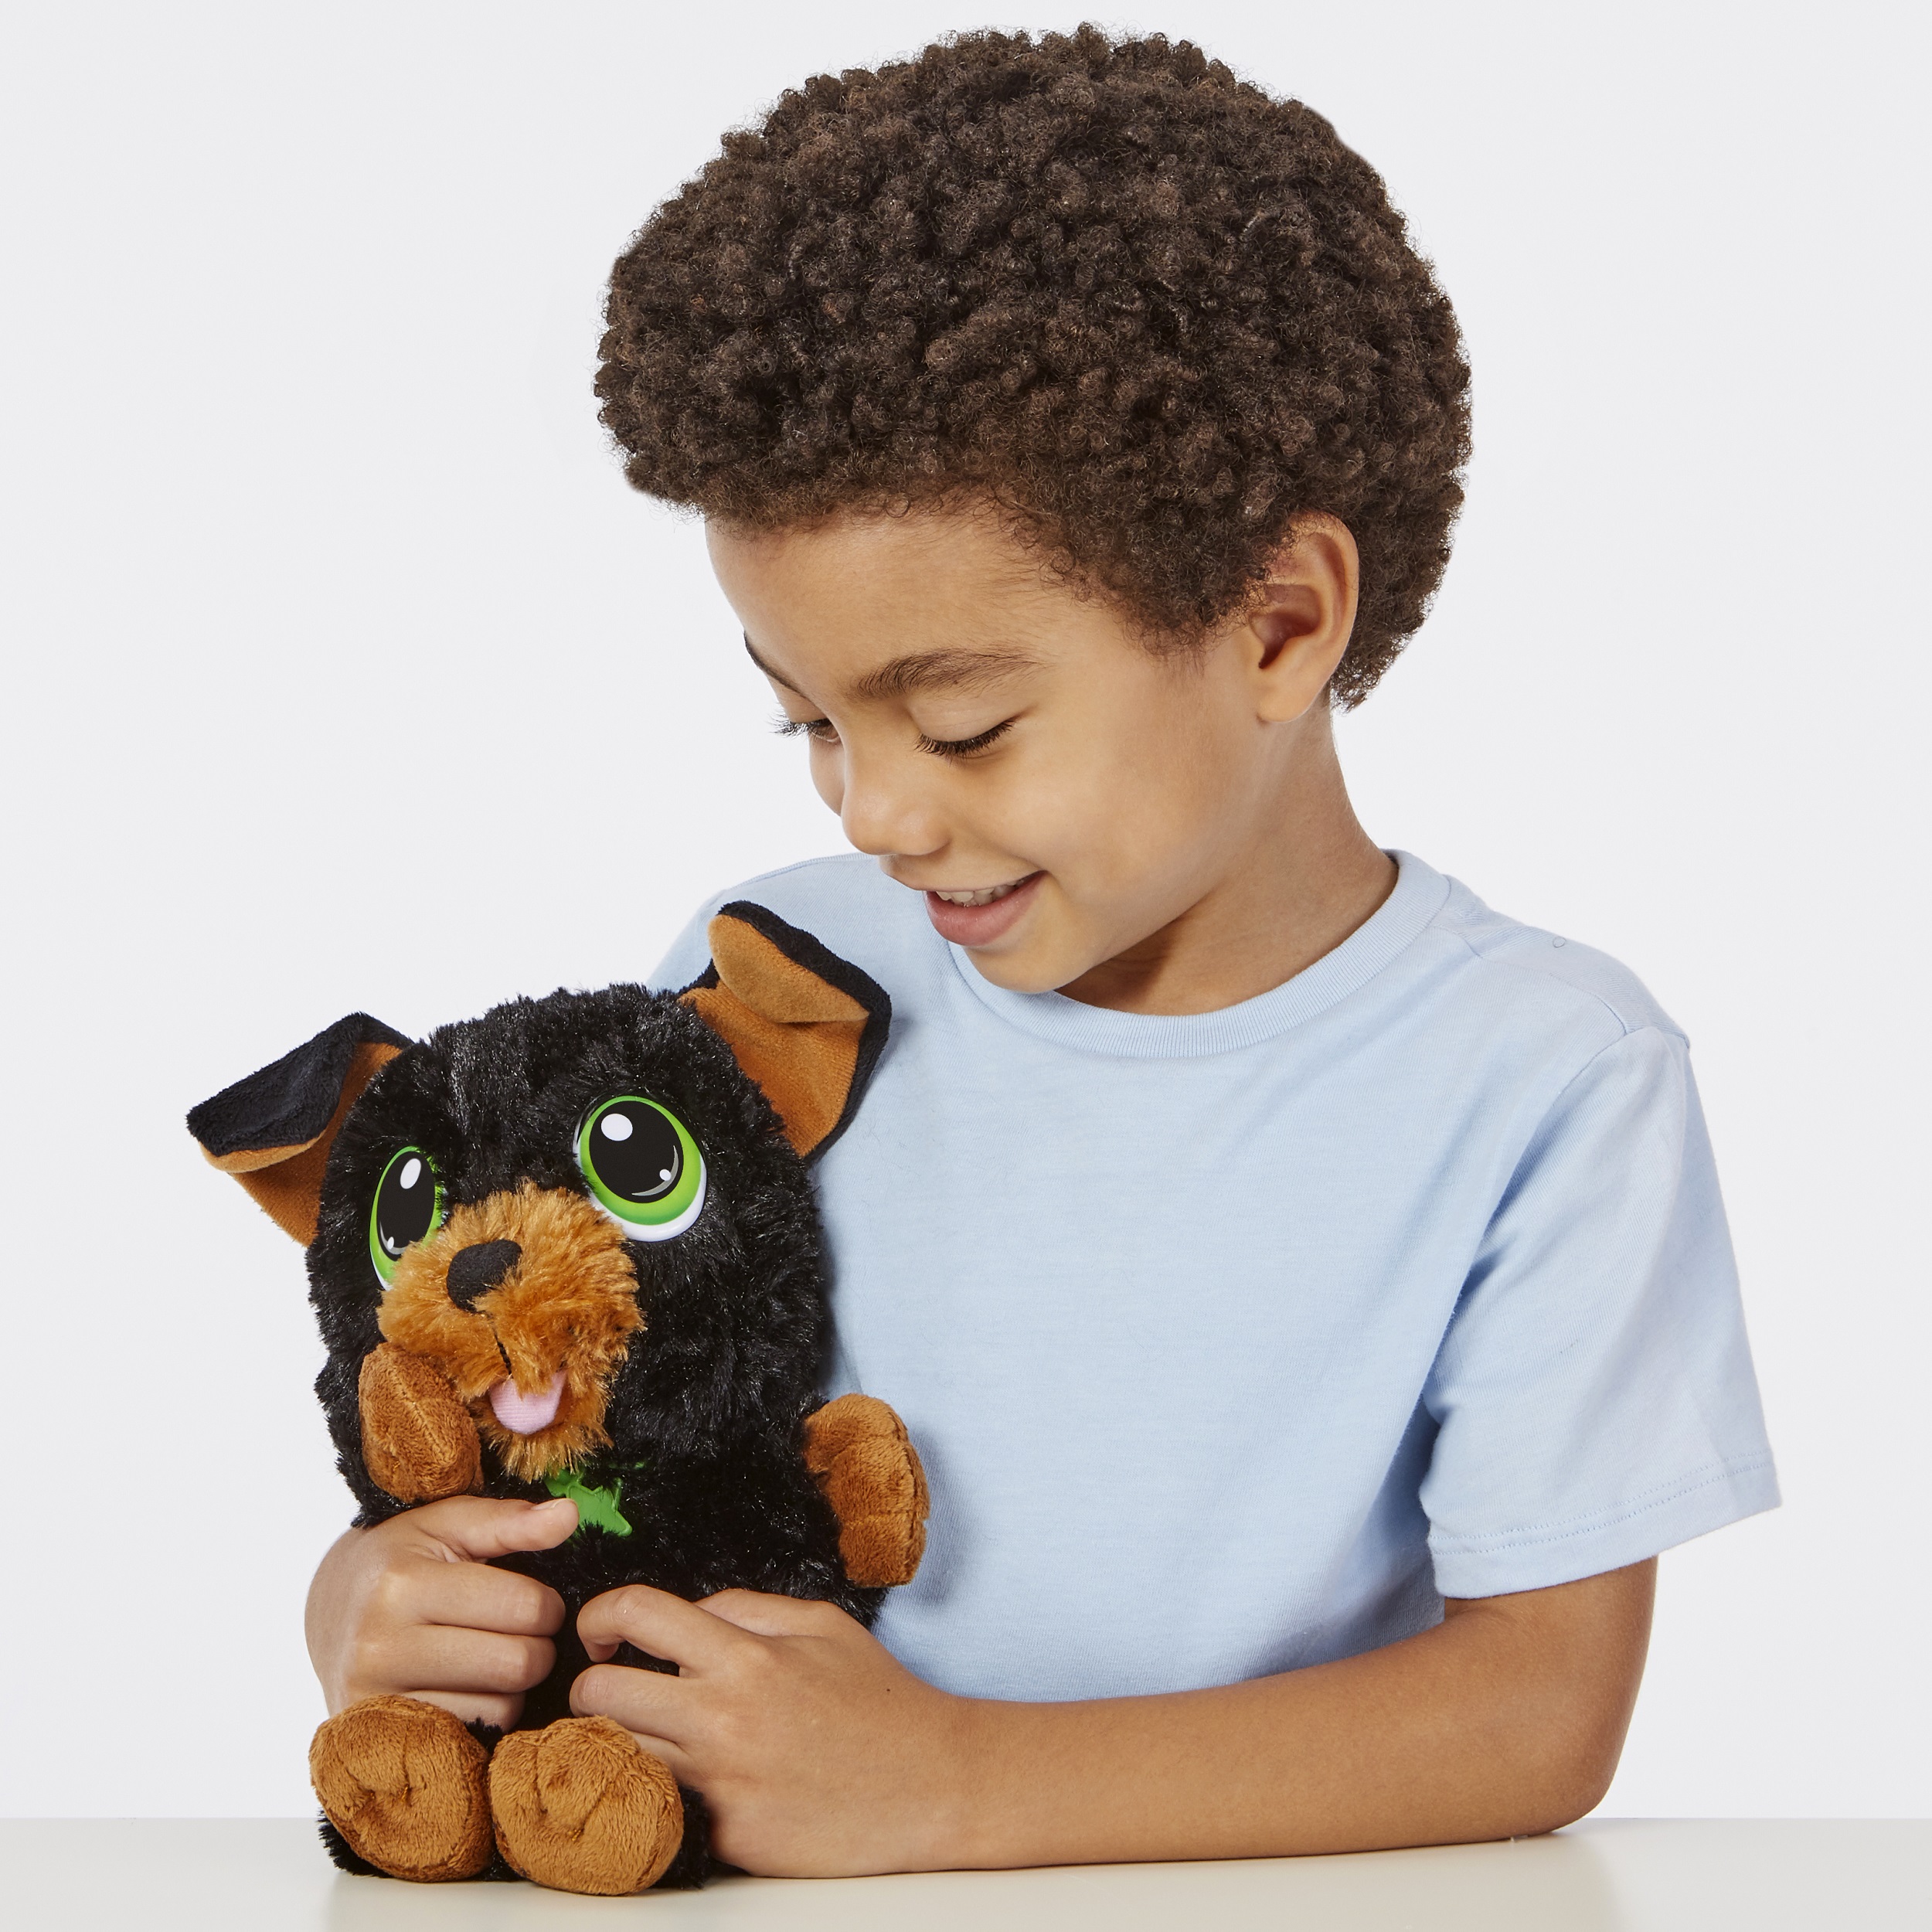 Rescue Tales Cuddly Pup Yorkie Soft Plush Pet Toy - image 5 of 7